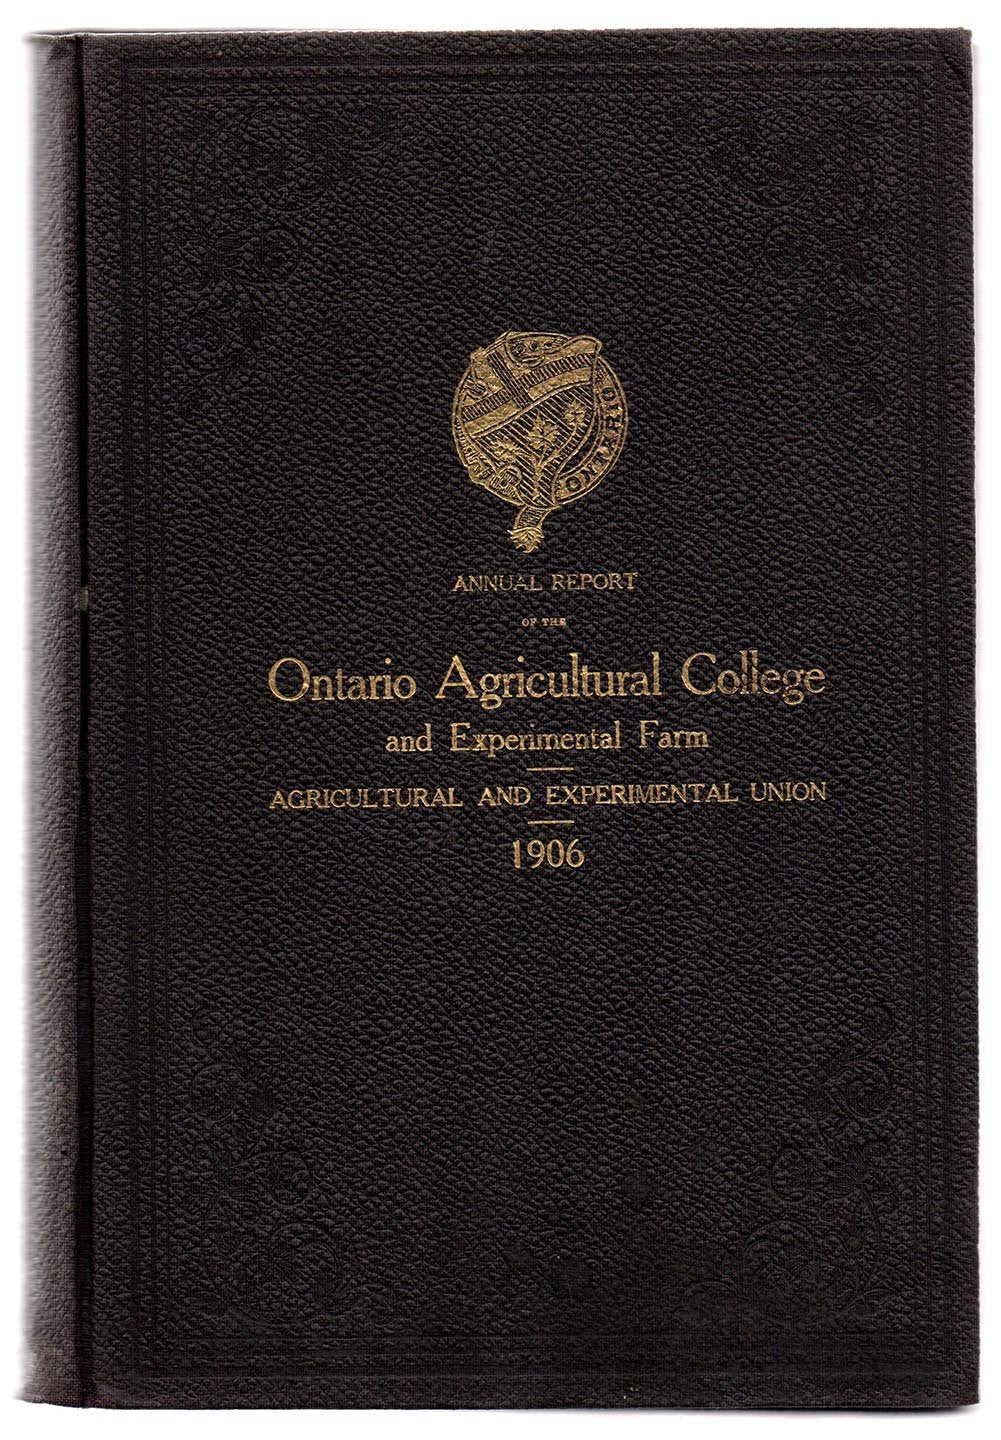 Thirty-second Annual Report of the Ontario Agricultural College and Experimental Farm 1906; Twenty-eighth Annual Report of the Agricultural and Experimental Union 1906